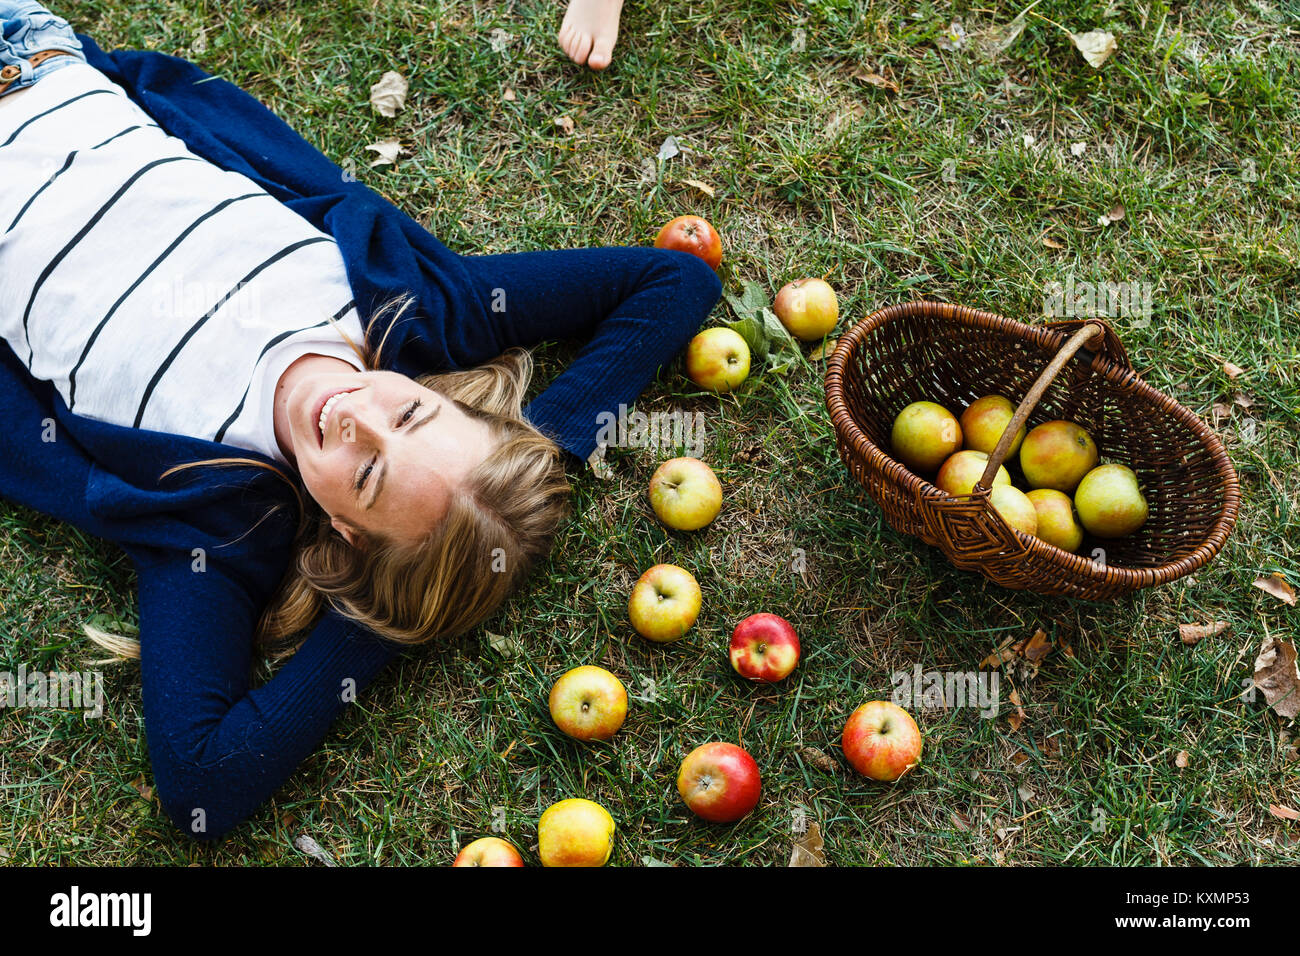 Woman with basket of apples Stock Photo